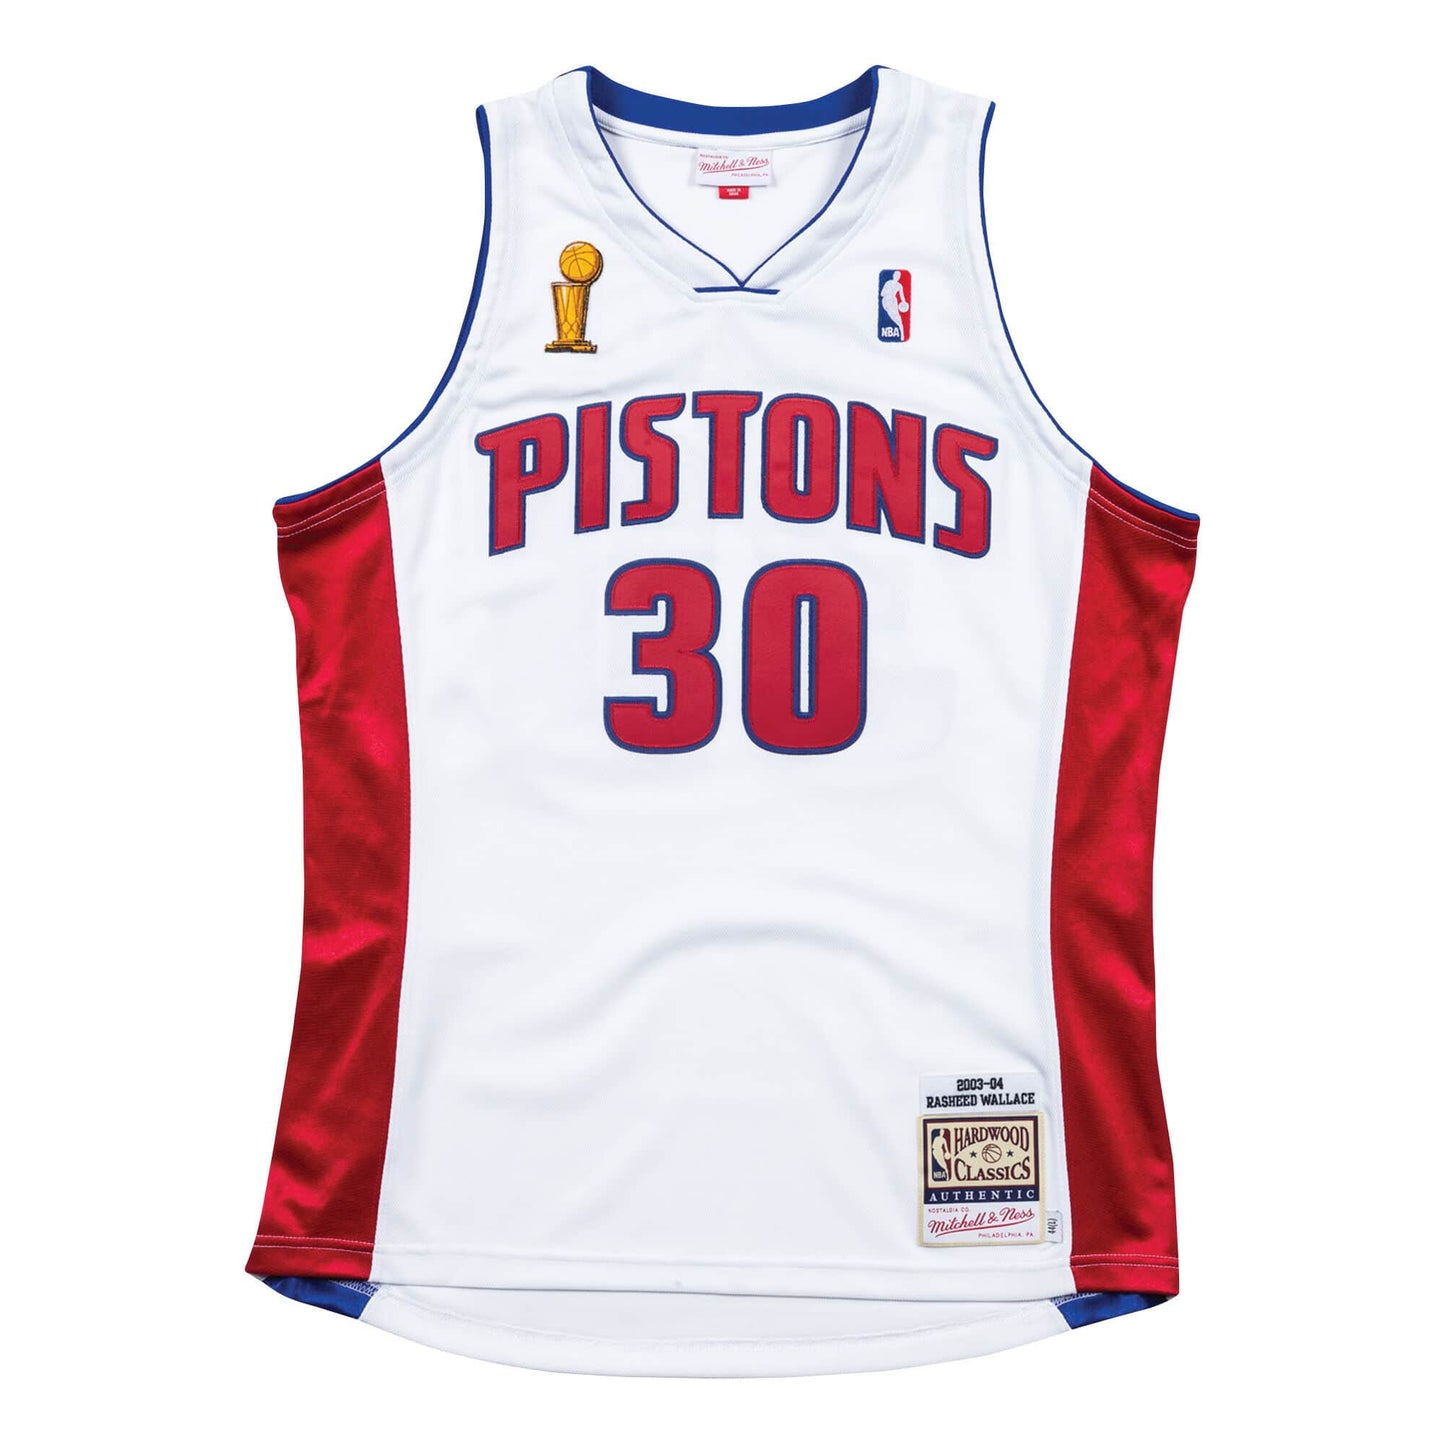 Authentic Jersey Detroit Pistons Home Finals 2003-04 Rasheed Wallace